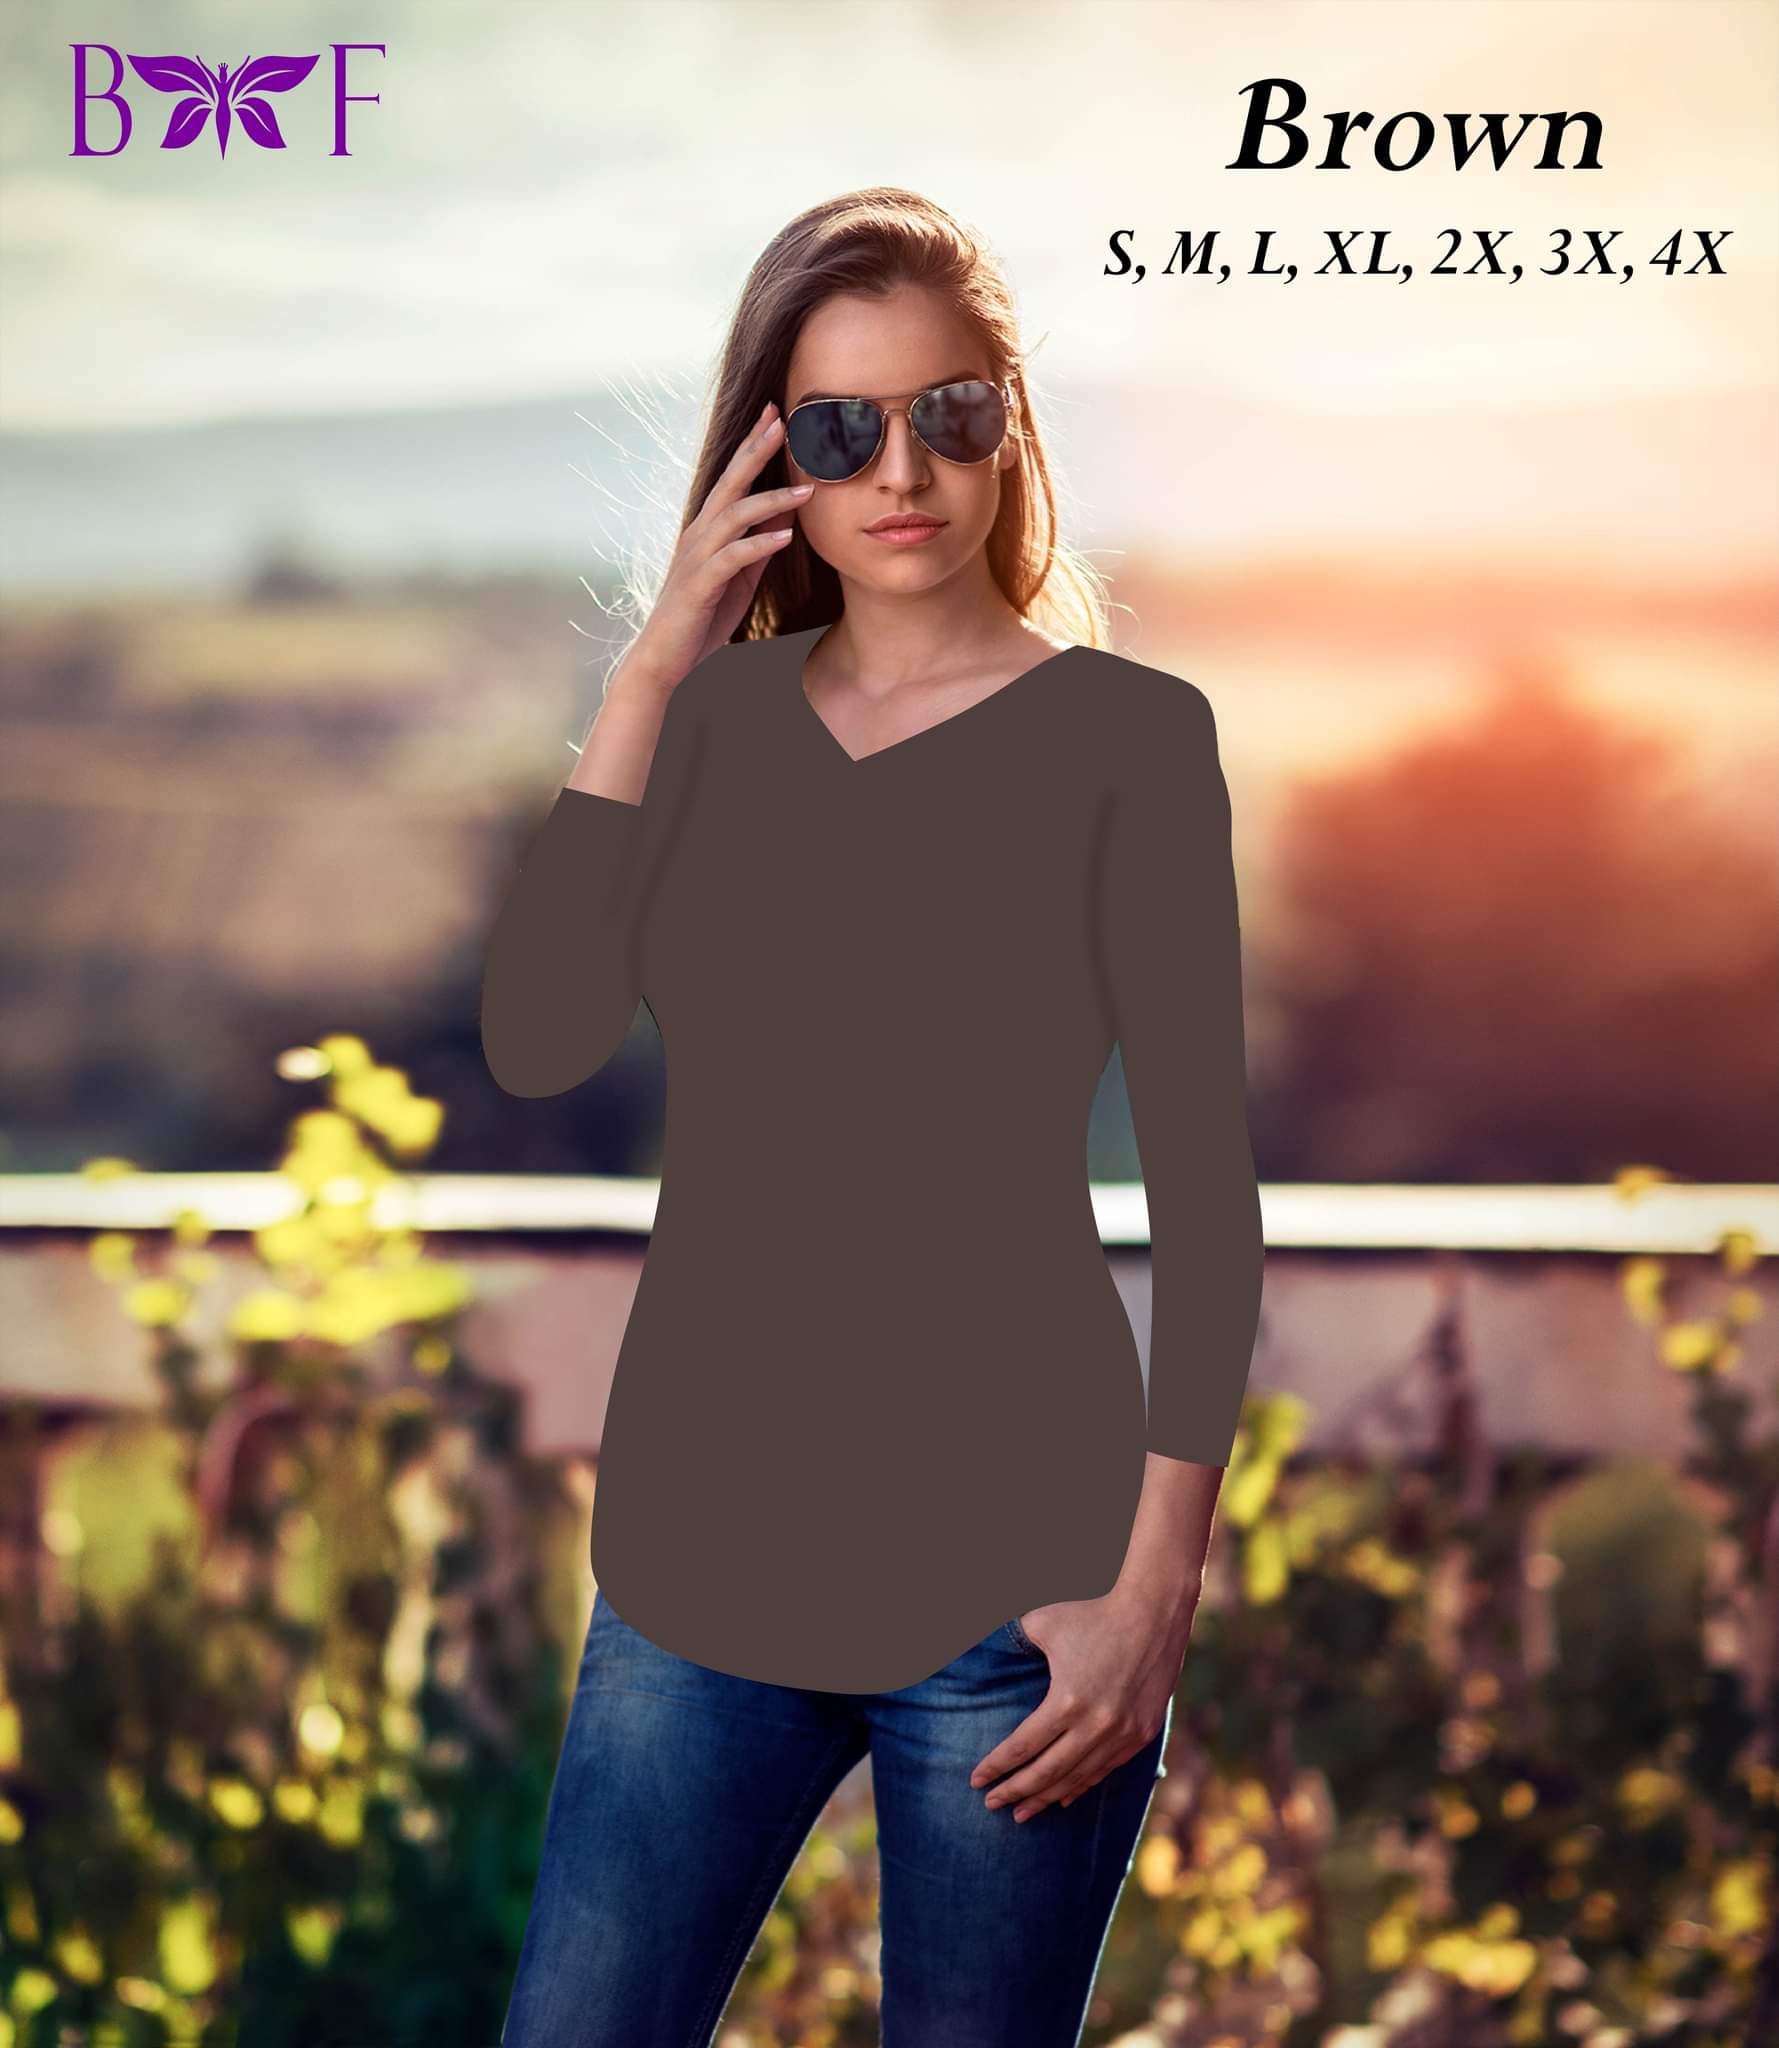 Brown v-neckline and a rounded bottom